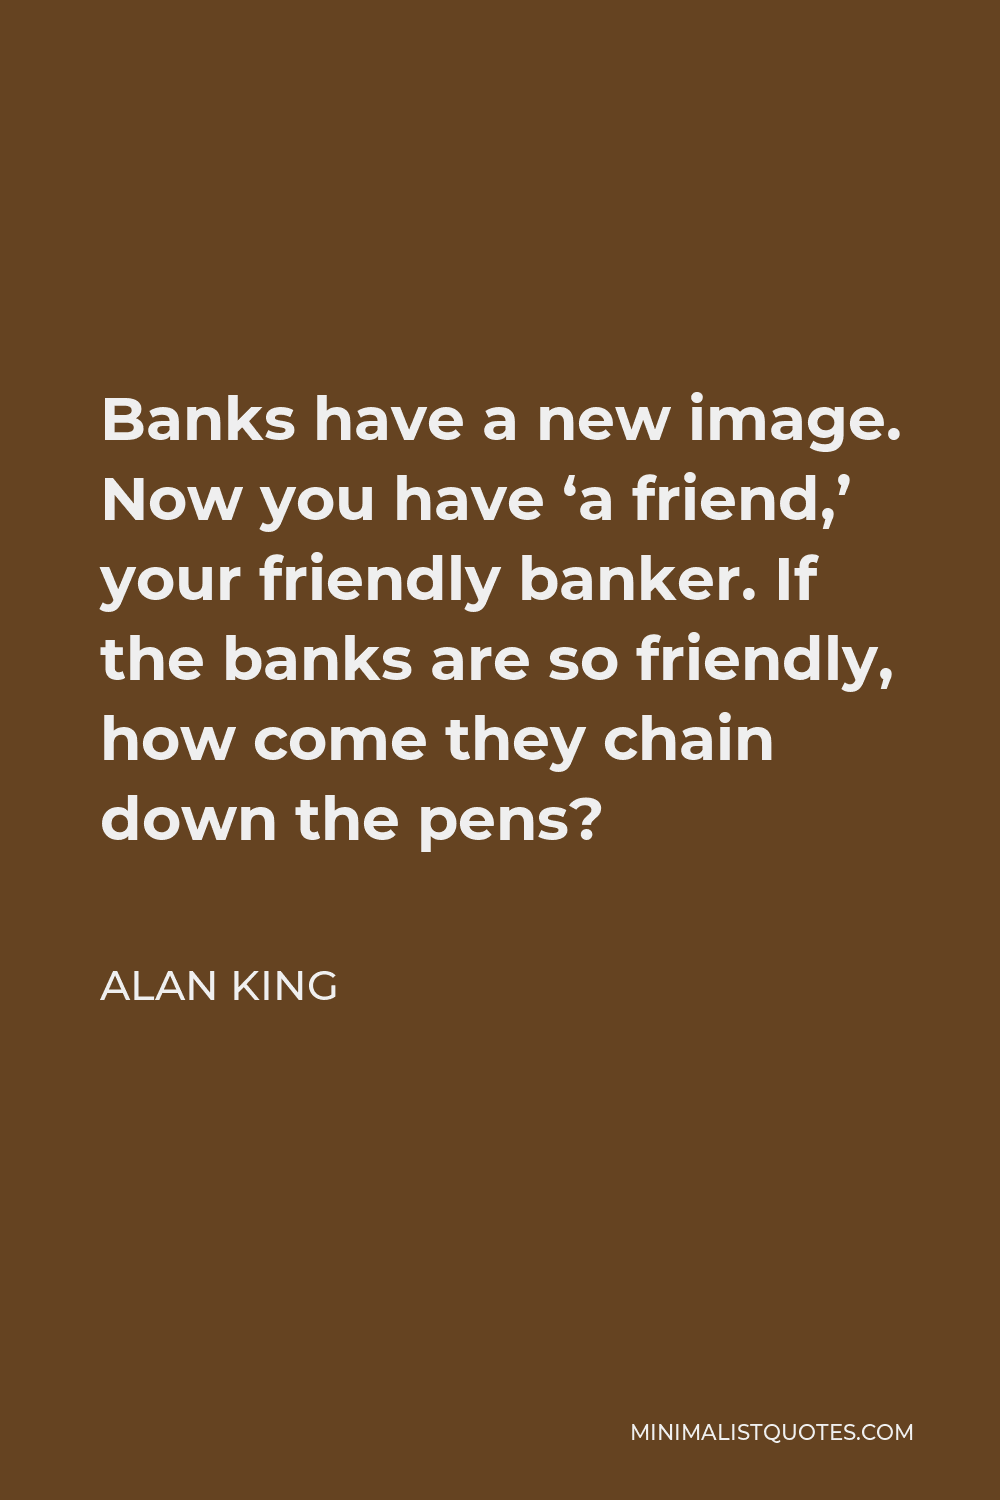 Alan King Quote - Banks have a new image. Now you have ‘a friend,’ your friendly banker. If the banks are so friendly, how come they chain down the pens?